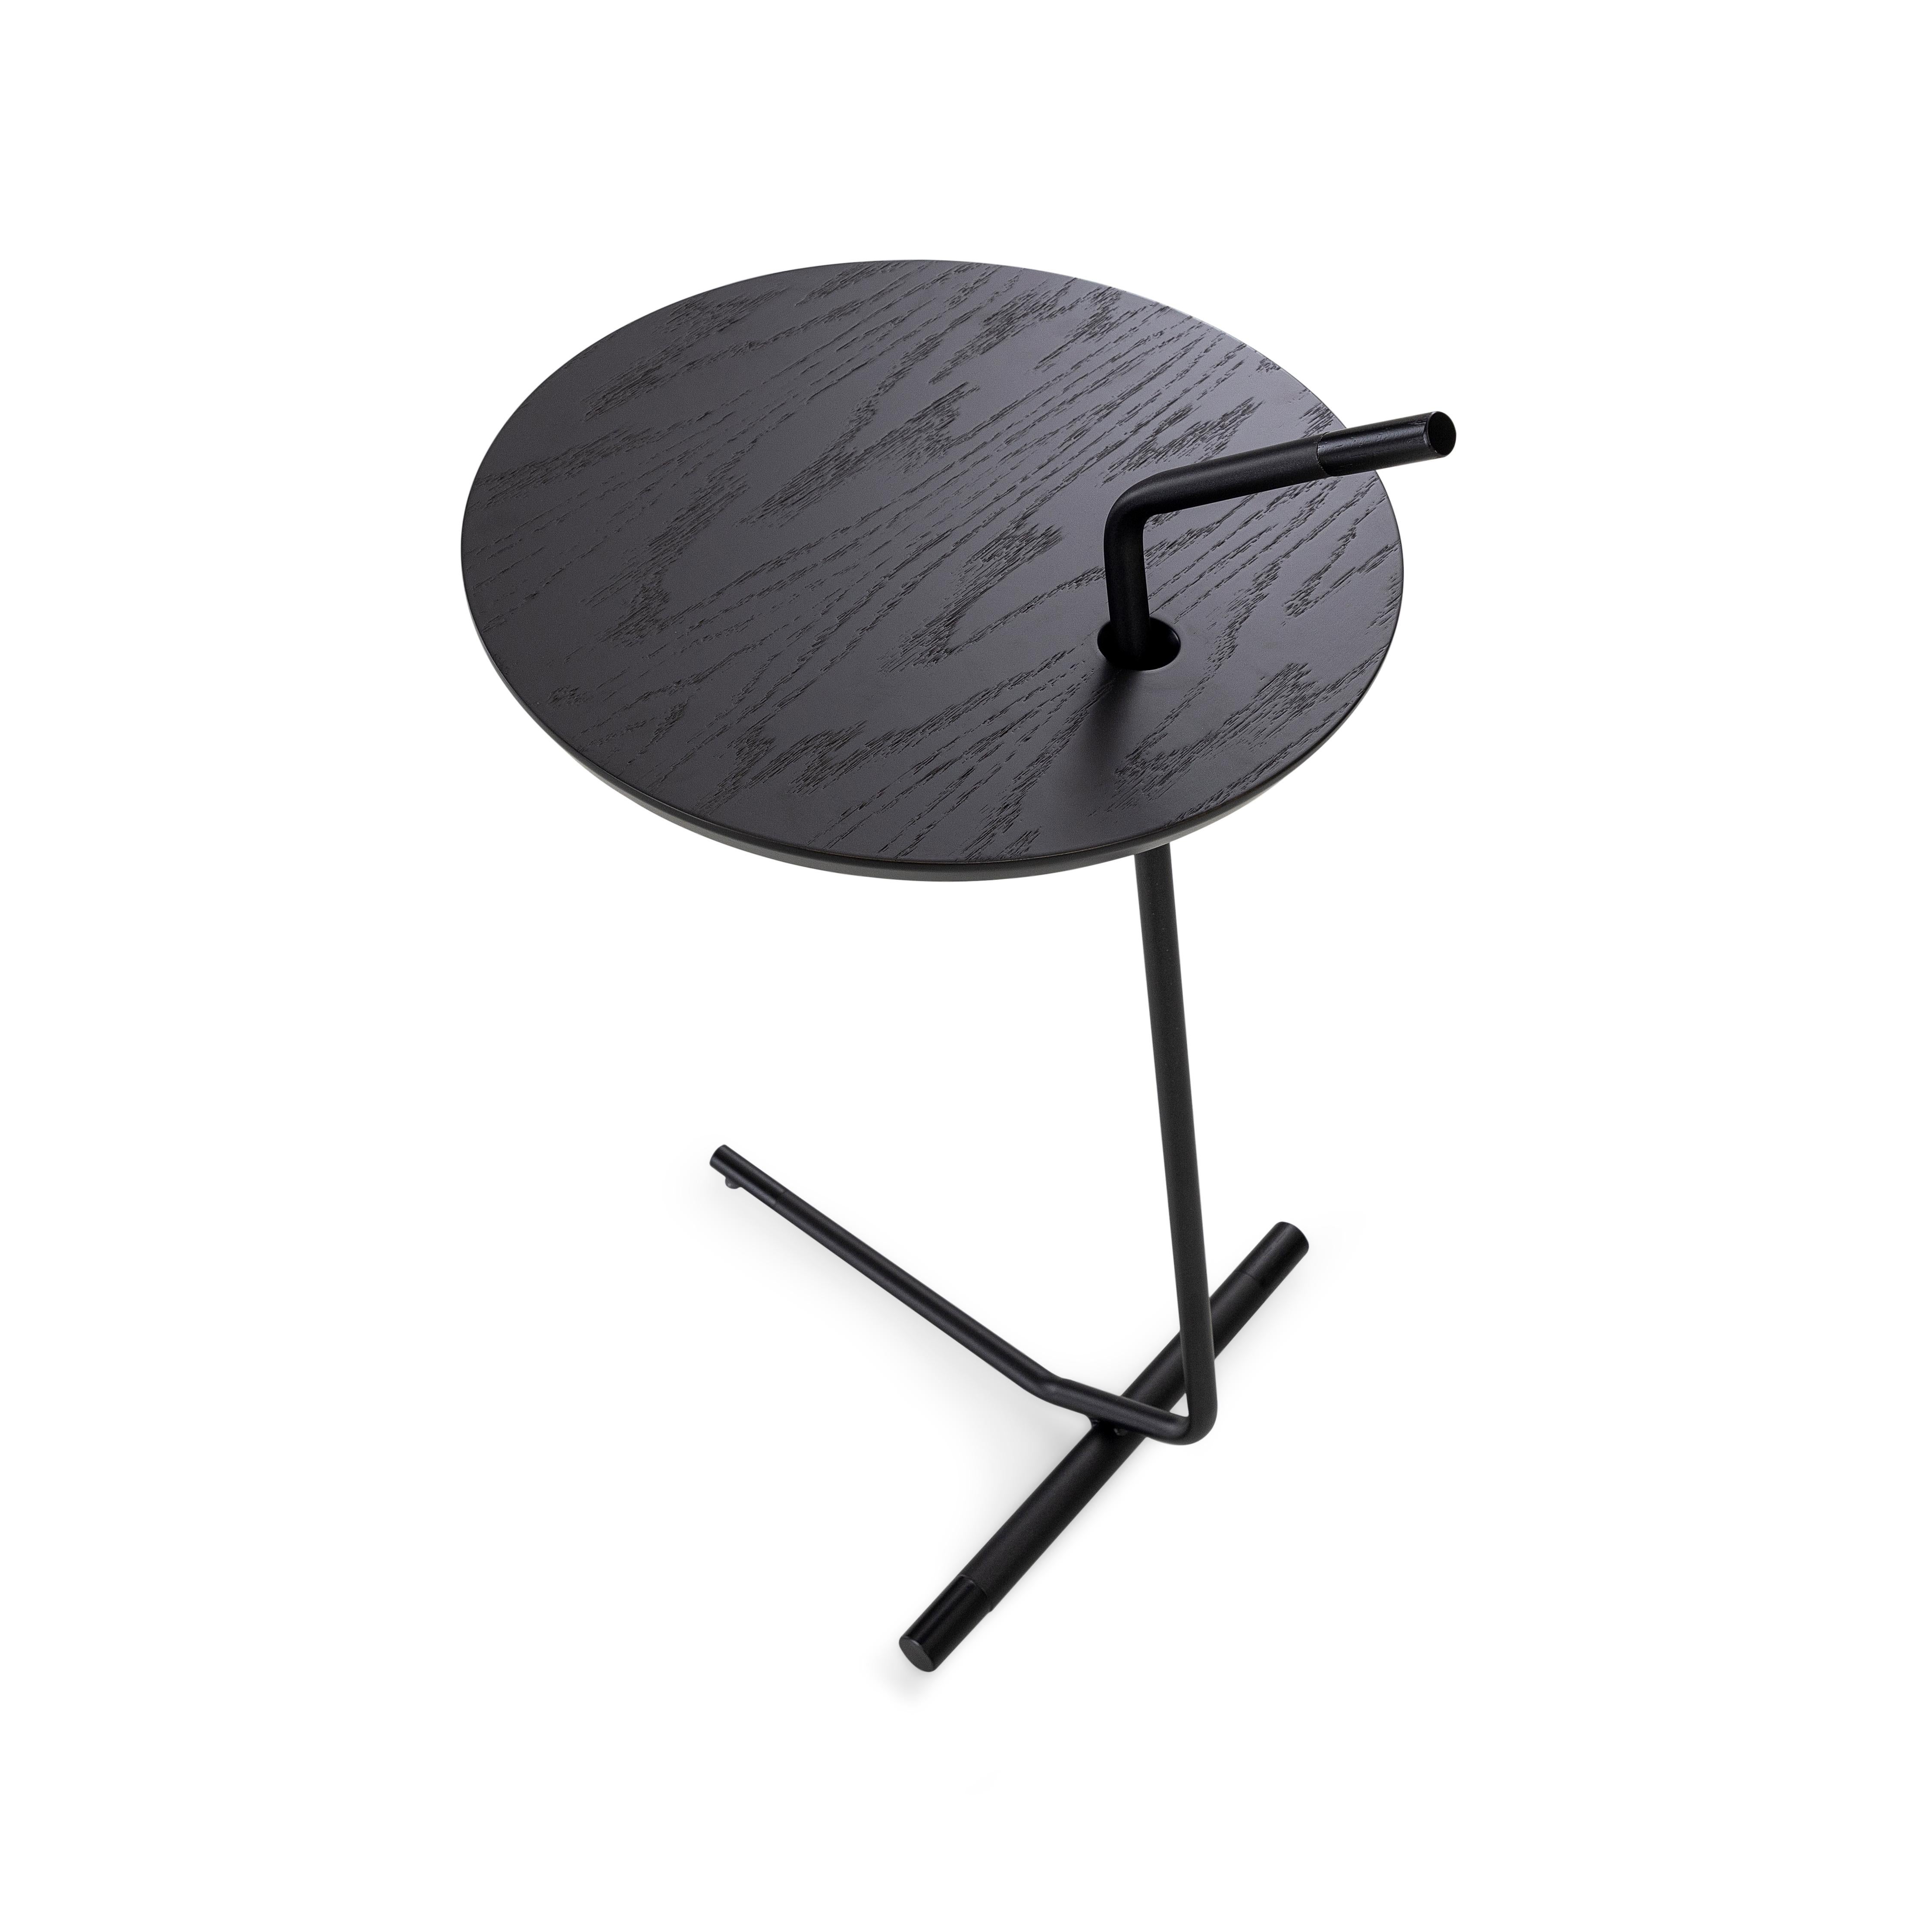 The like side table features a wood top in black oak finish and a metal base. This table is made of parallels, giving a distinctive shape and an unconventional look. This table features a black oak wood finish and the metal will attract all the